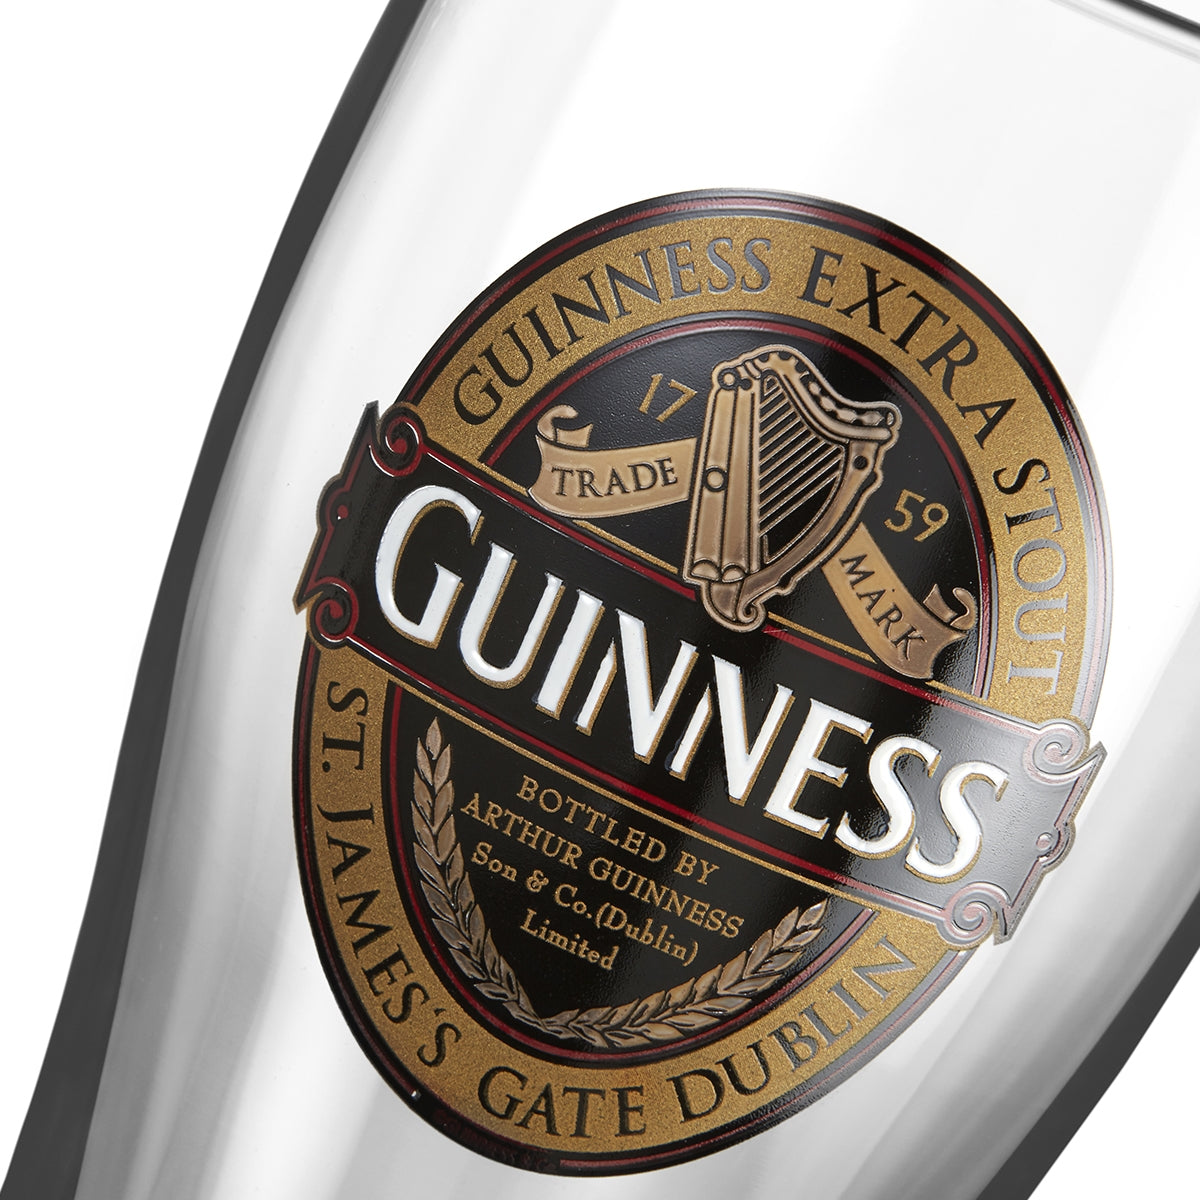 Guinness glass with a pint of Guinness Classic Pint Glass logo on it.